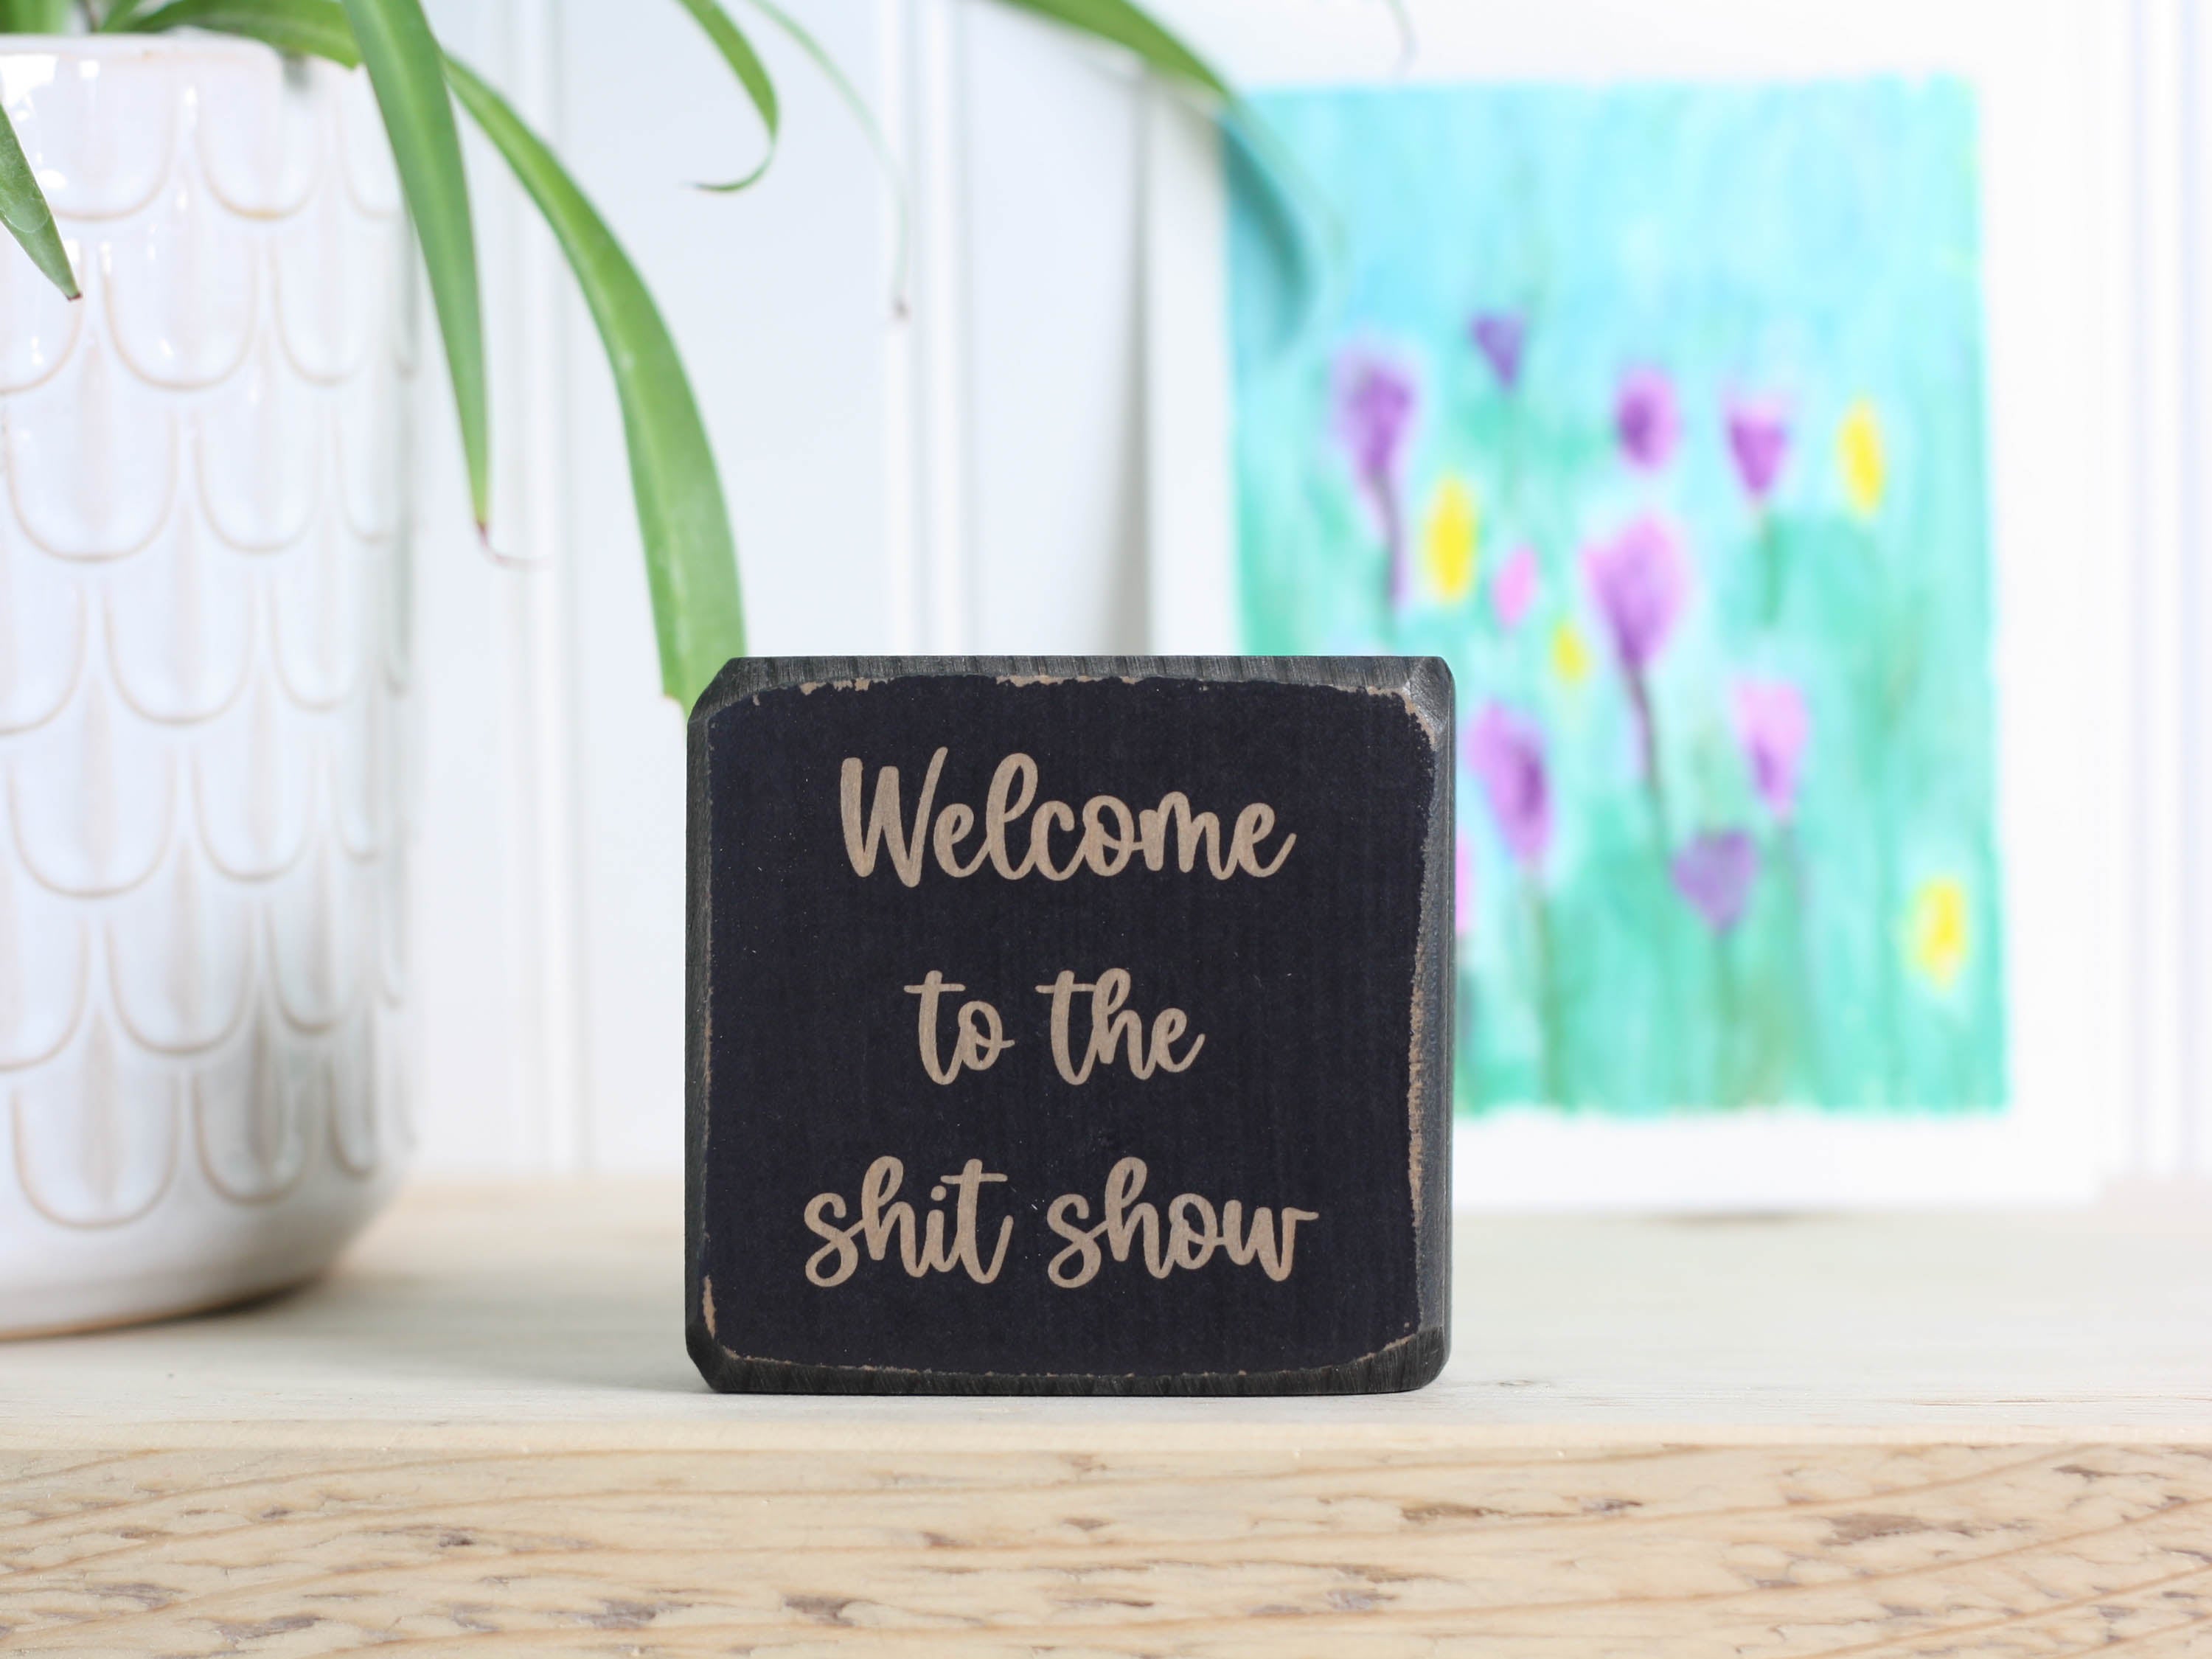 Small wood shelf sitter in distressed black with the saying "Welcome to the shit show".